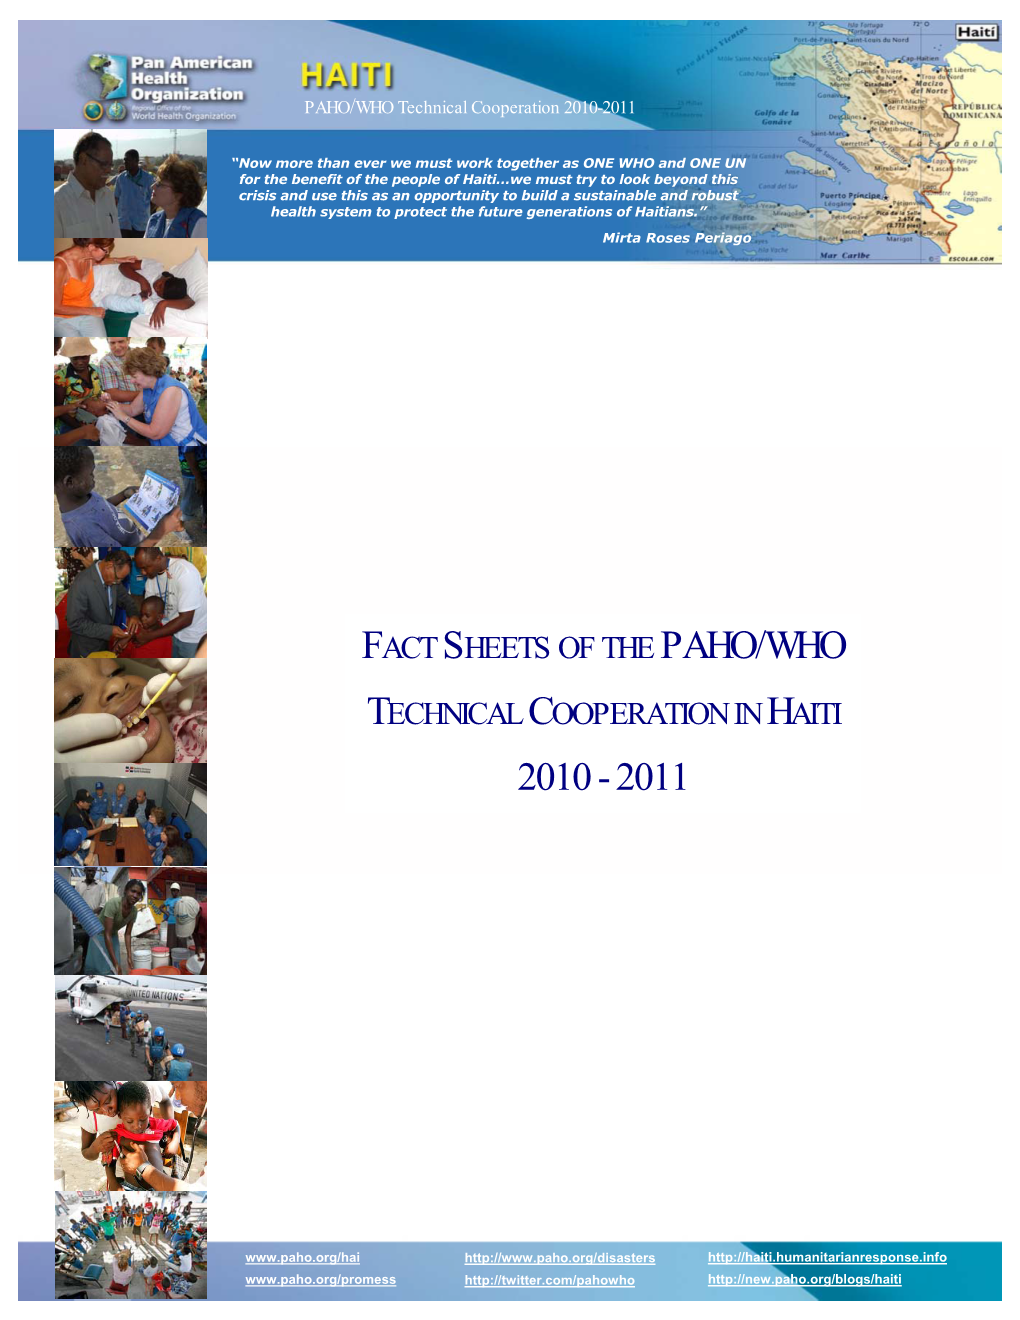 Fact Sheets of the Paho/Who Technical Cooperation in Haiti 2010-2011